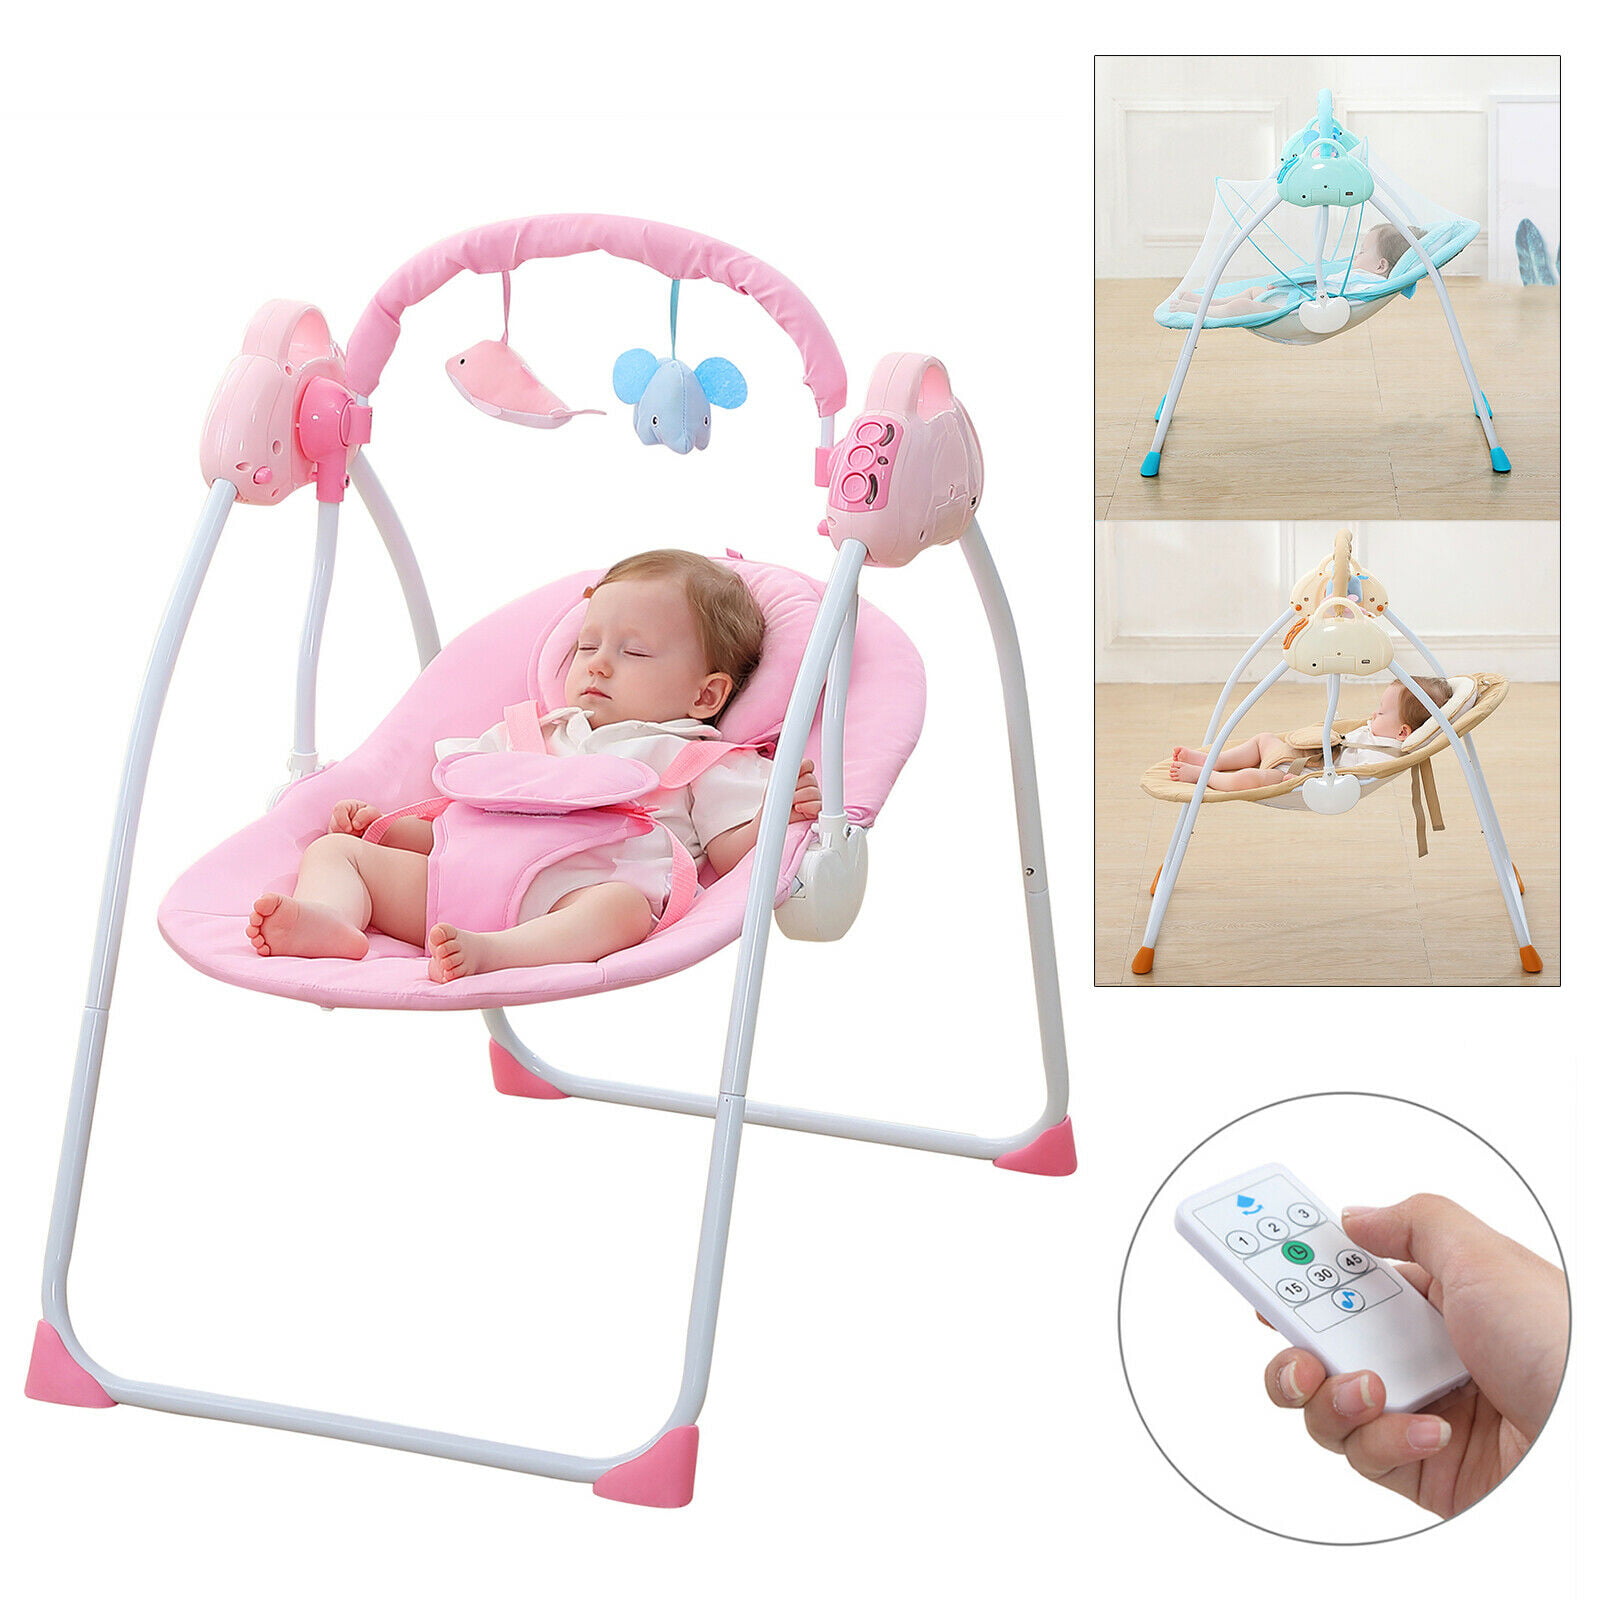 Ankidz Toddler Learning Walker Suitable for Baby Children 0-2 Years Old Swings & Chair Bouncers